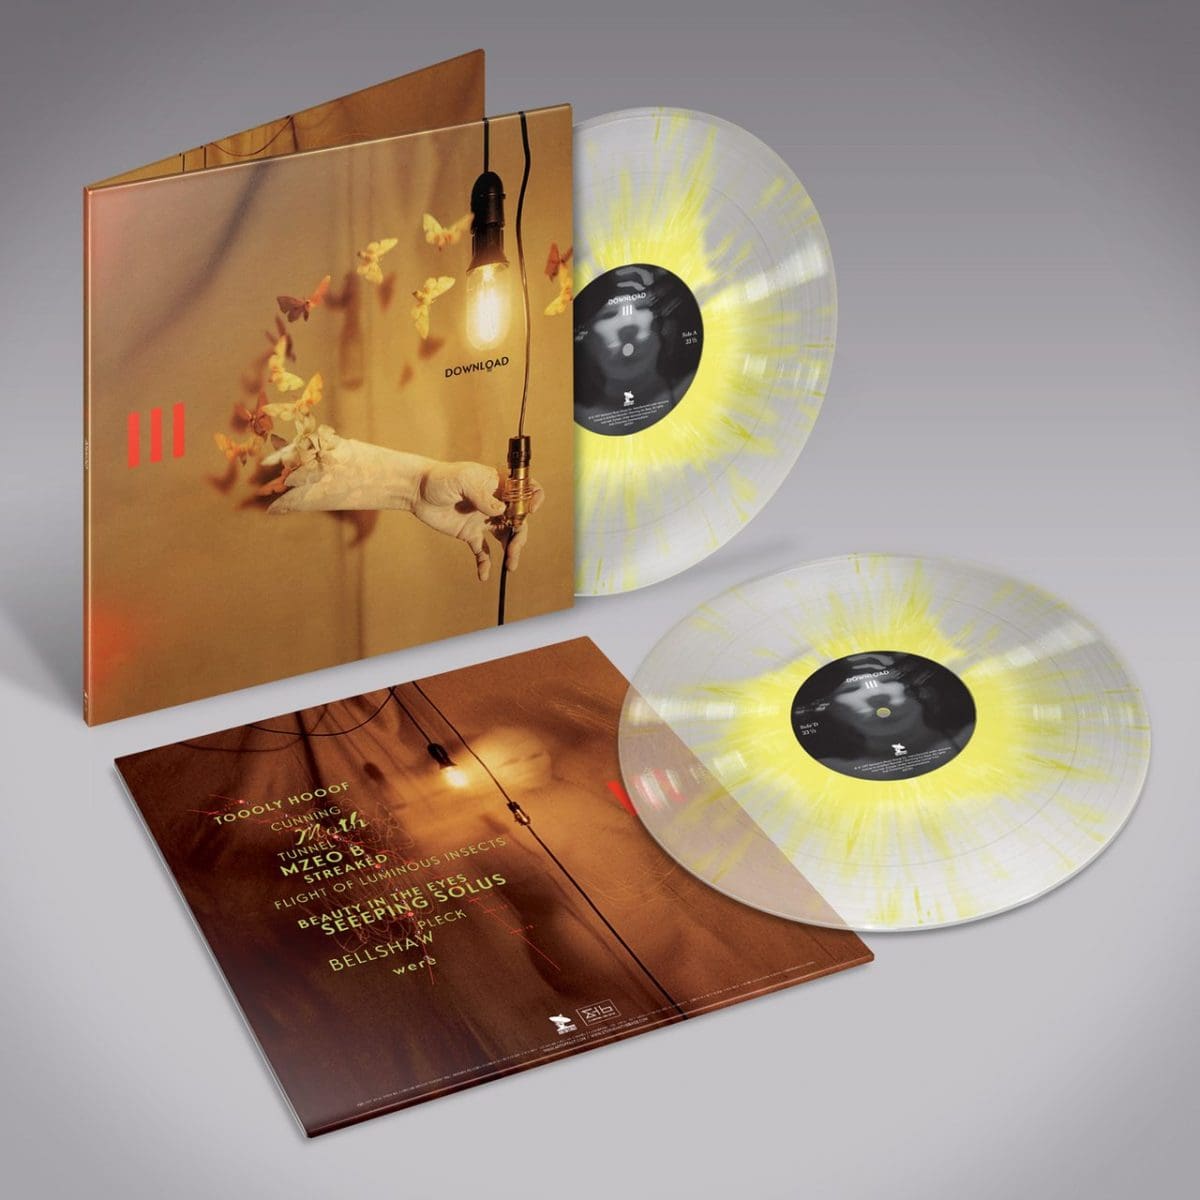 Skinny Puppy Fans, Attention! Massive Reissue Campaign for Download (skinny Puppy's Cevin Key) and Phil Western on Ltd Ed. Coloured Vinyl - Pre-orders Available Now